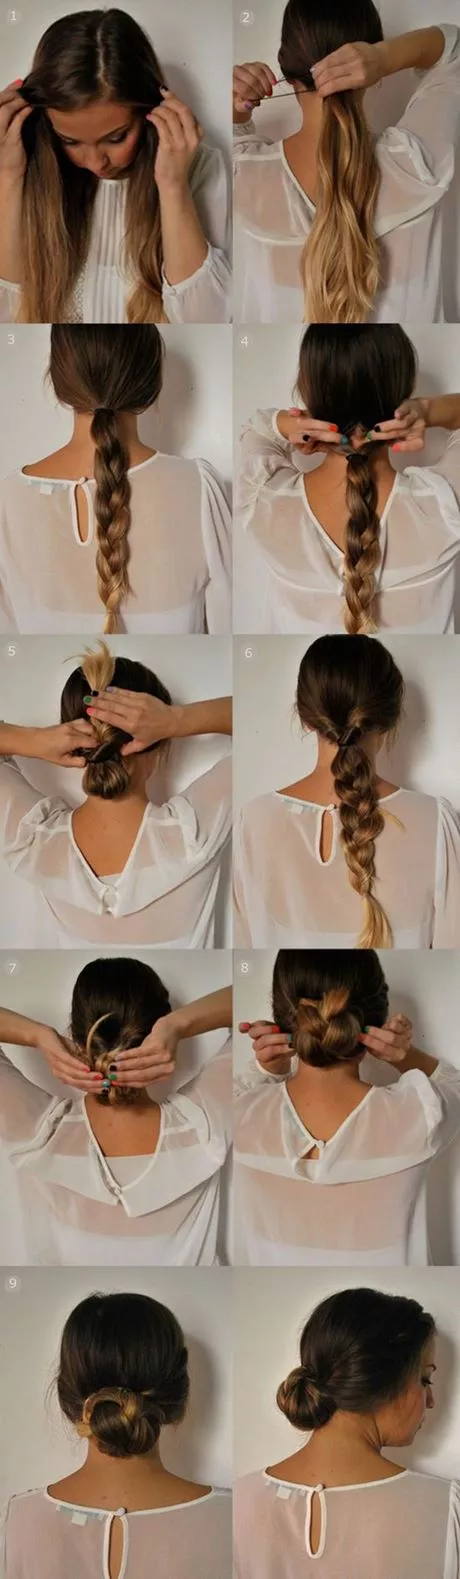 Easy but pretty hairstyles easy-but-pretty-hairstyles-14_7-13-13